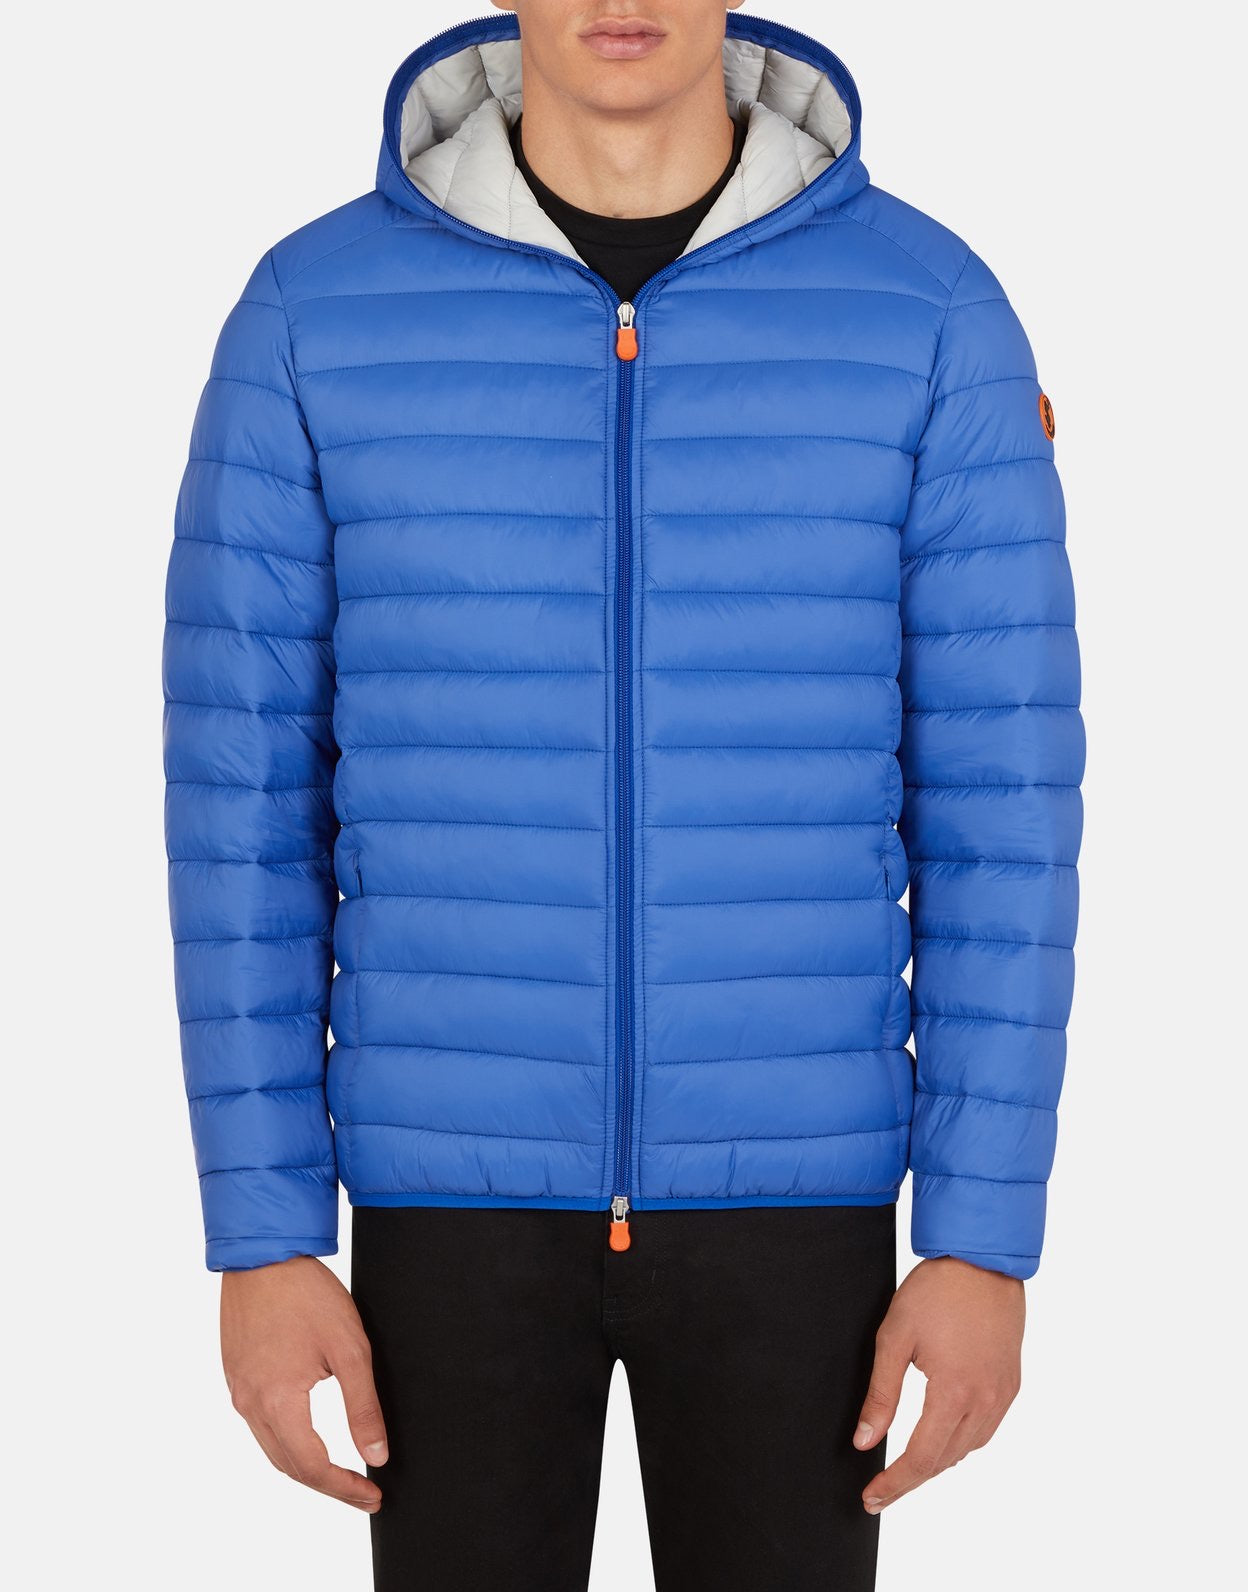 HOODED BUBBLE - BLUE - SMALL